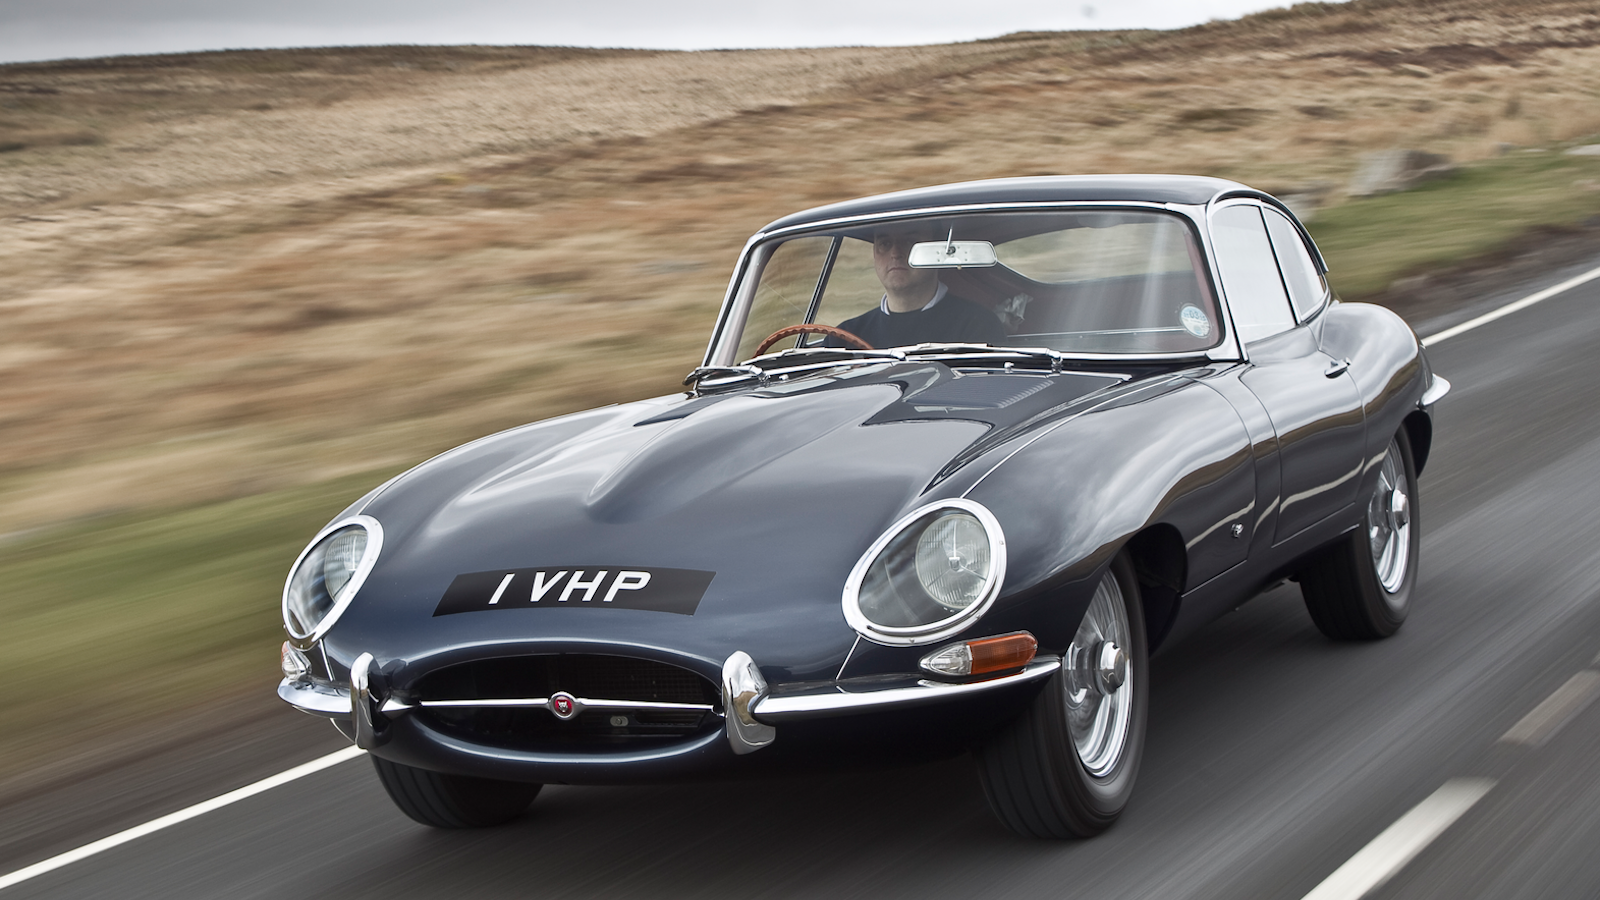 28 reasons the E-type won our hearts